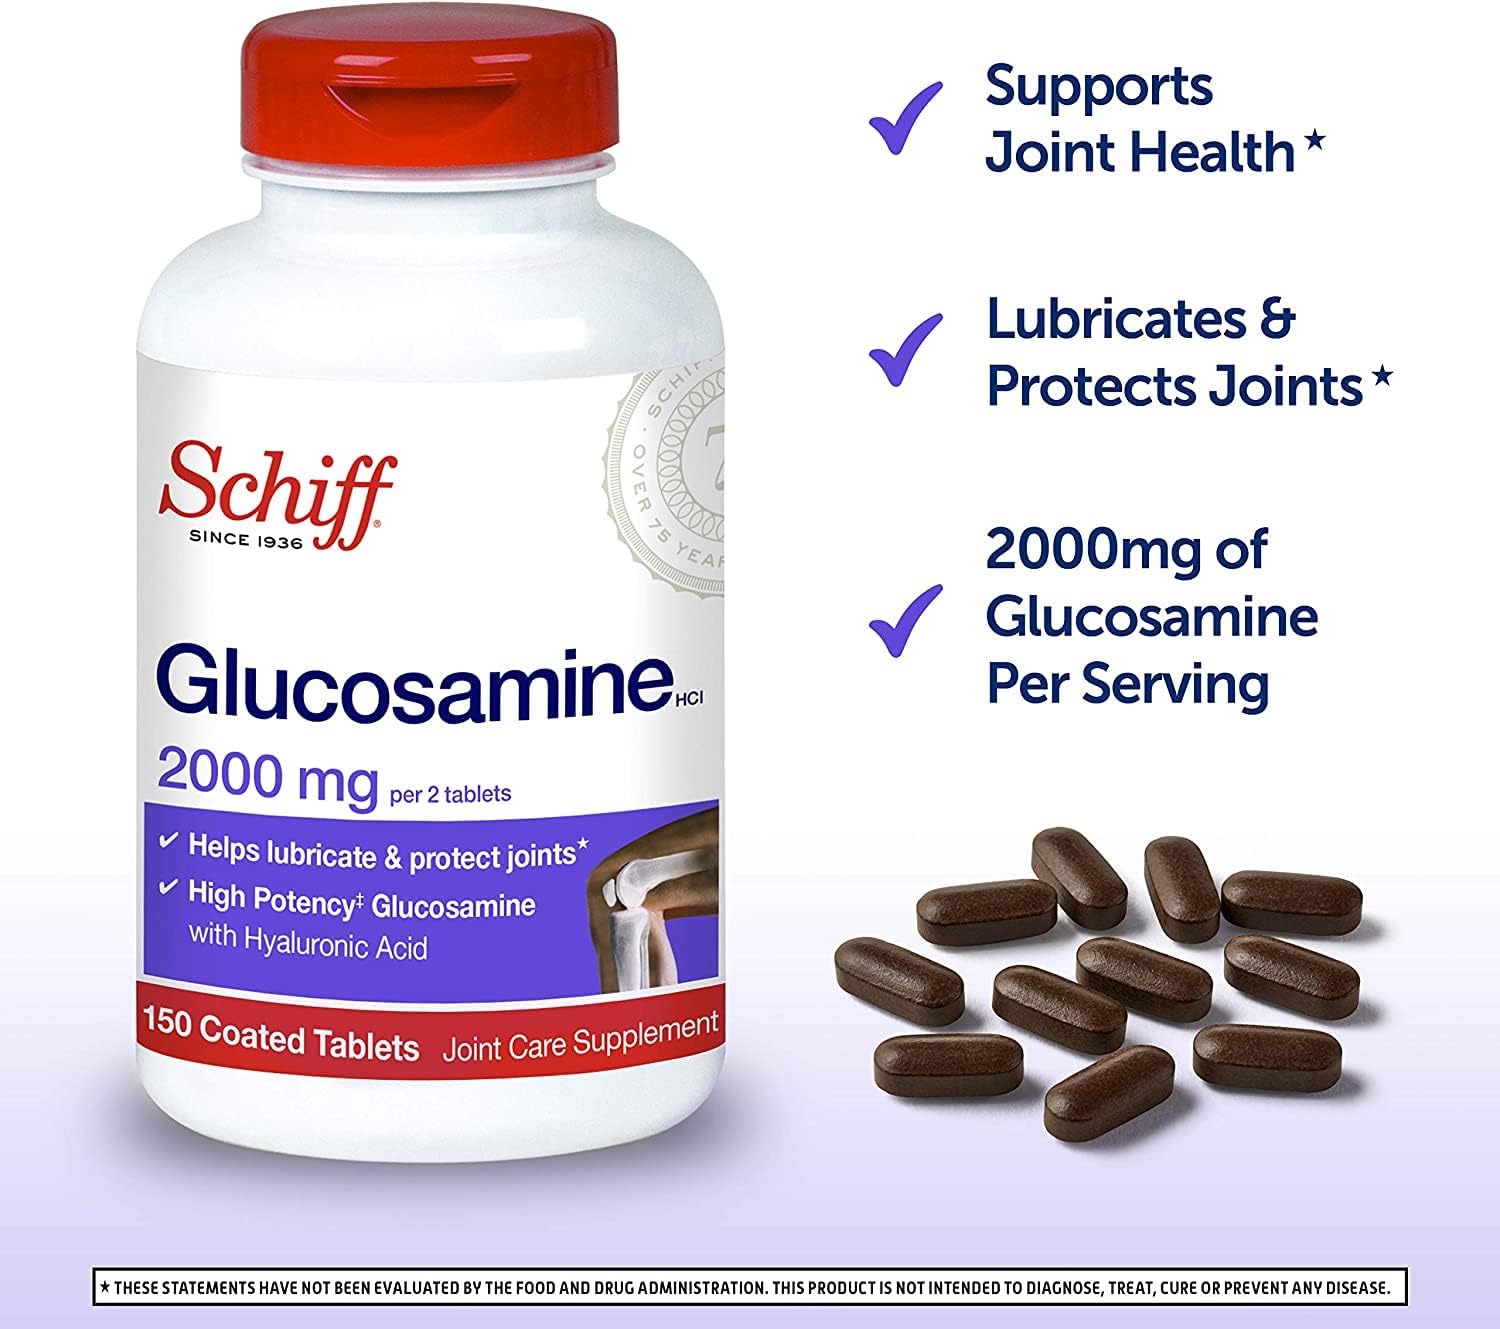 Schiff Glucosamine With Hyaluronic Acid, 2000mg Glucosamine, Joint Care Supplement Helps Lubricate & Protect Joints*, 150 Count (Pack of 2)